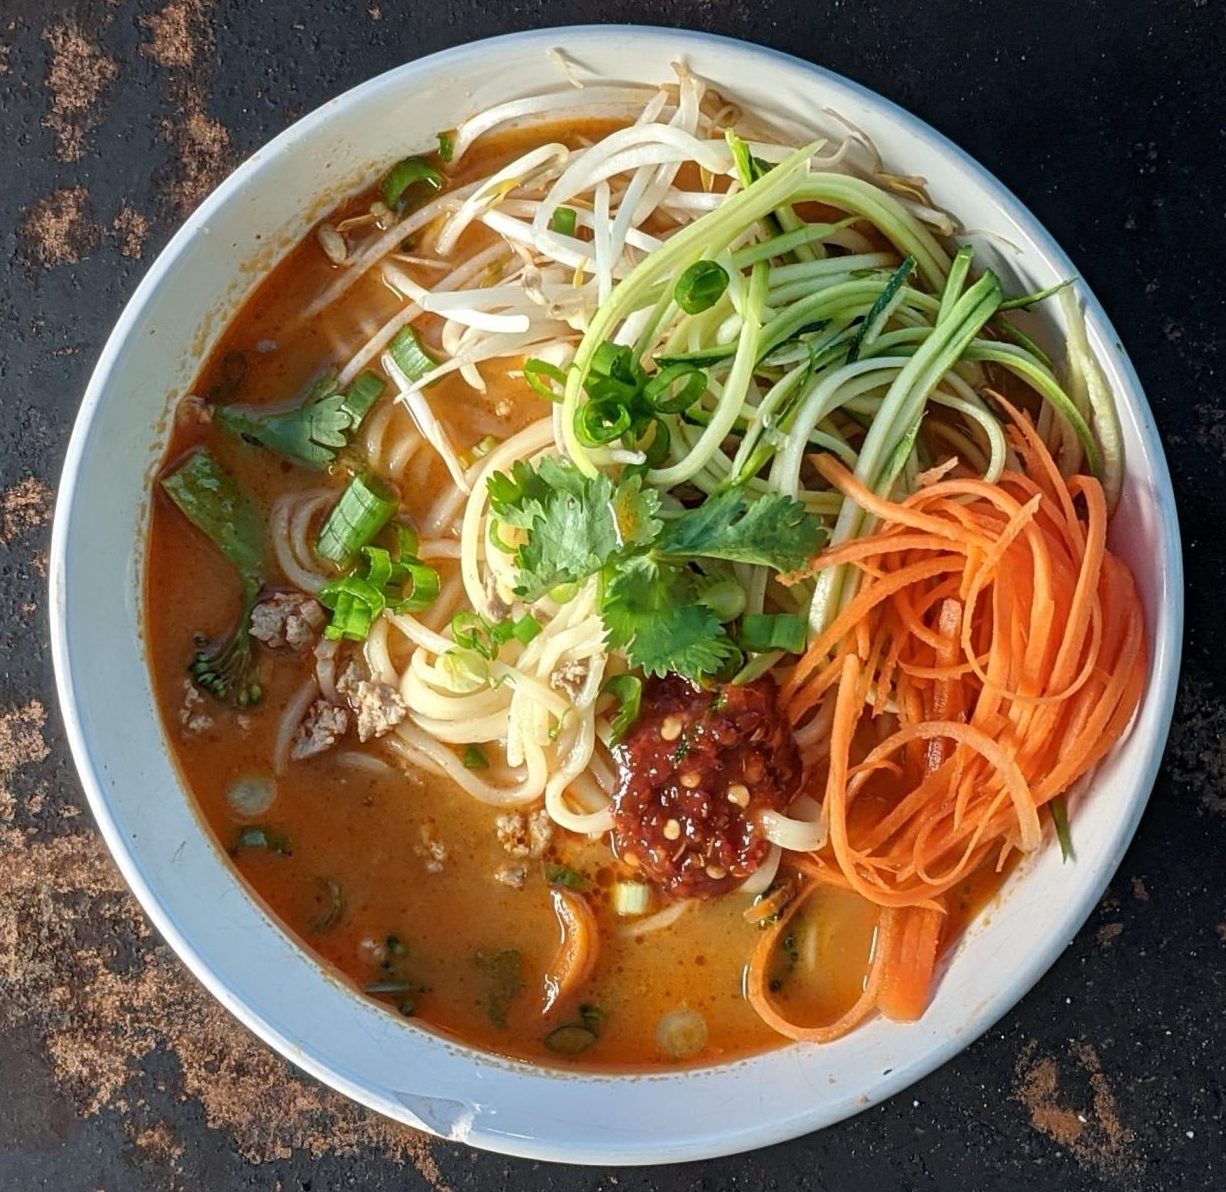 Red-curry-chicken-noodle-bowl-in-a-bowl-image.jpg